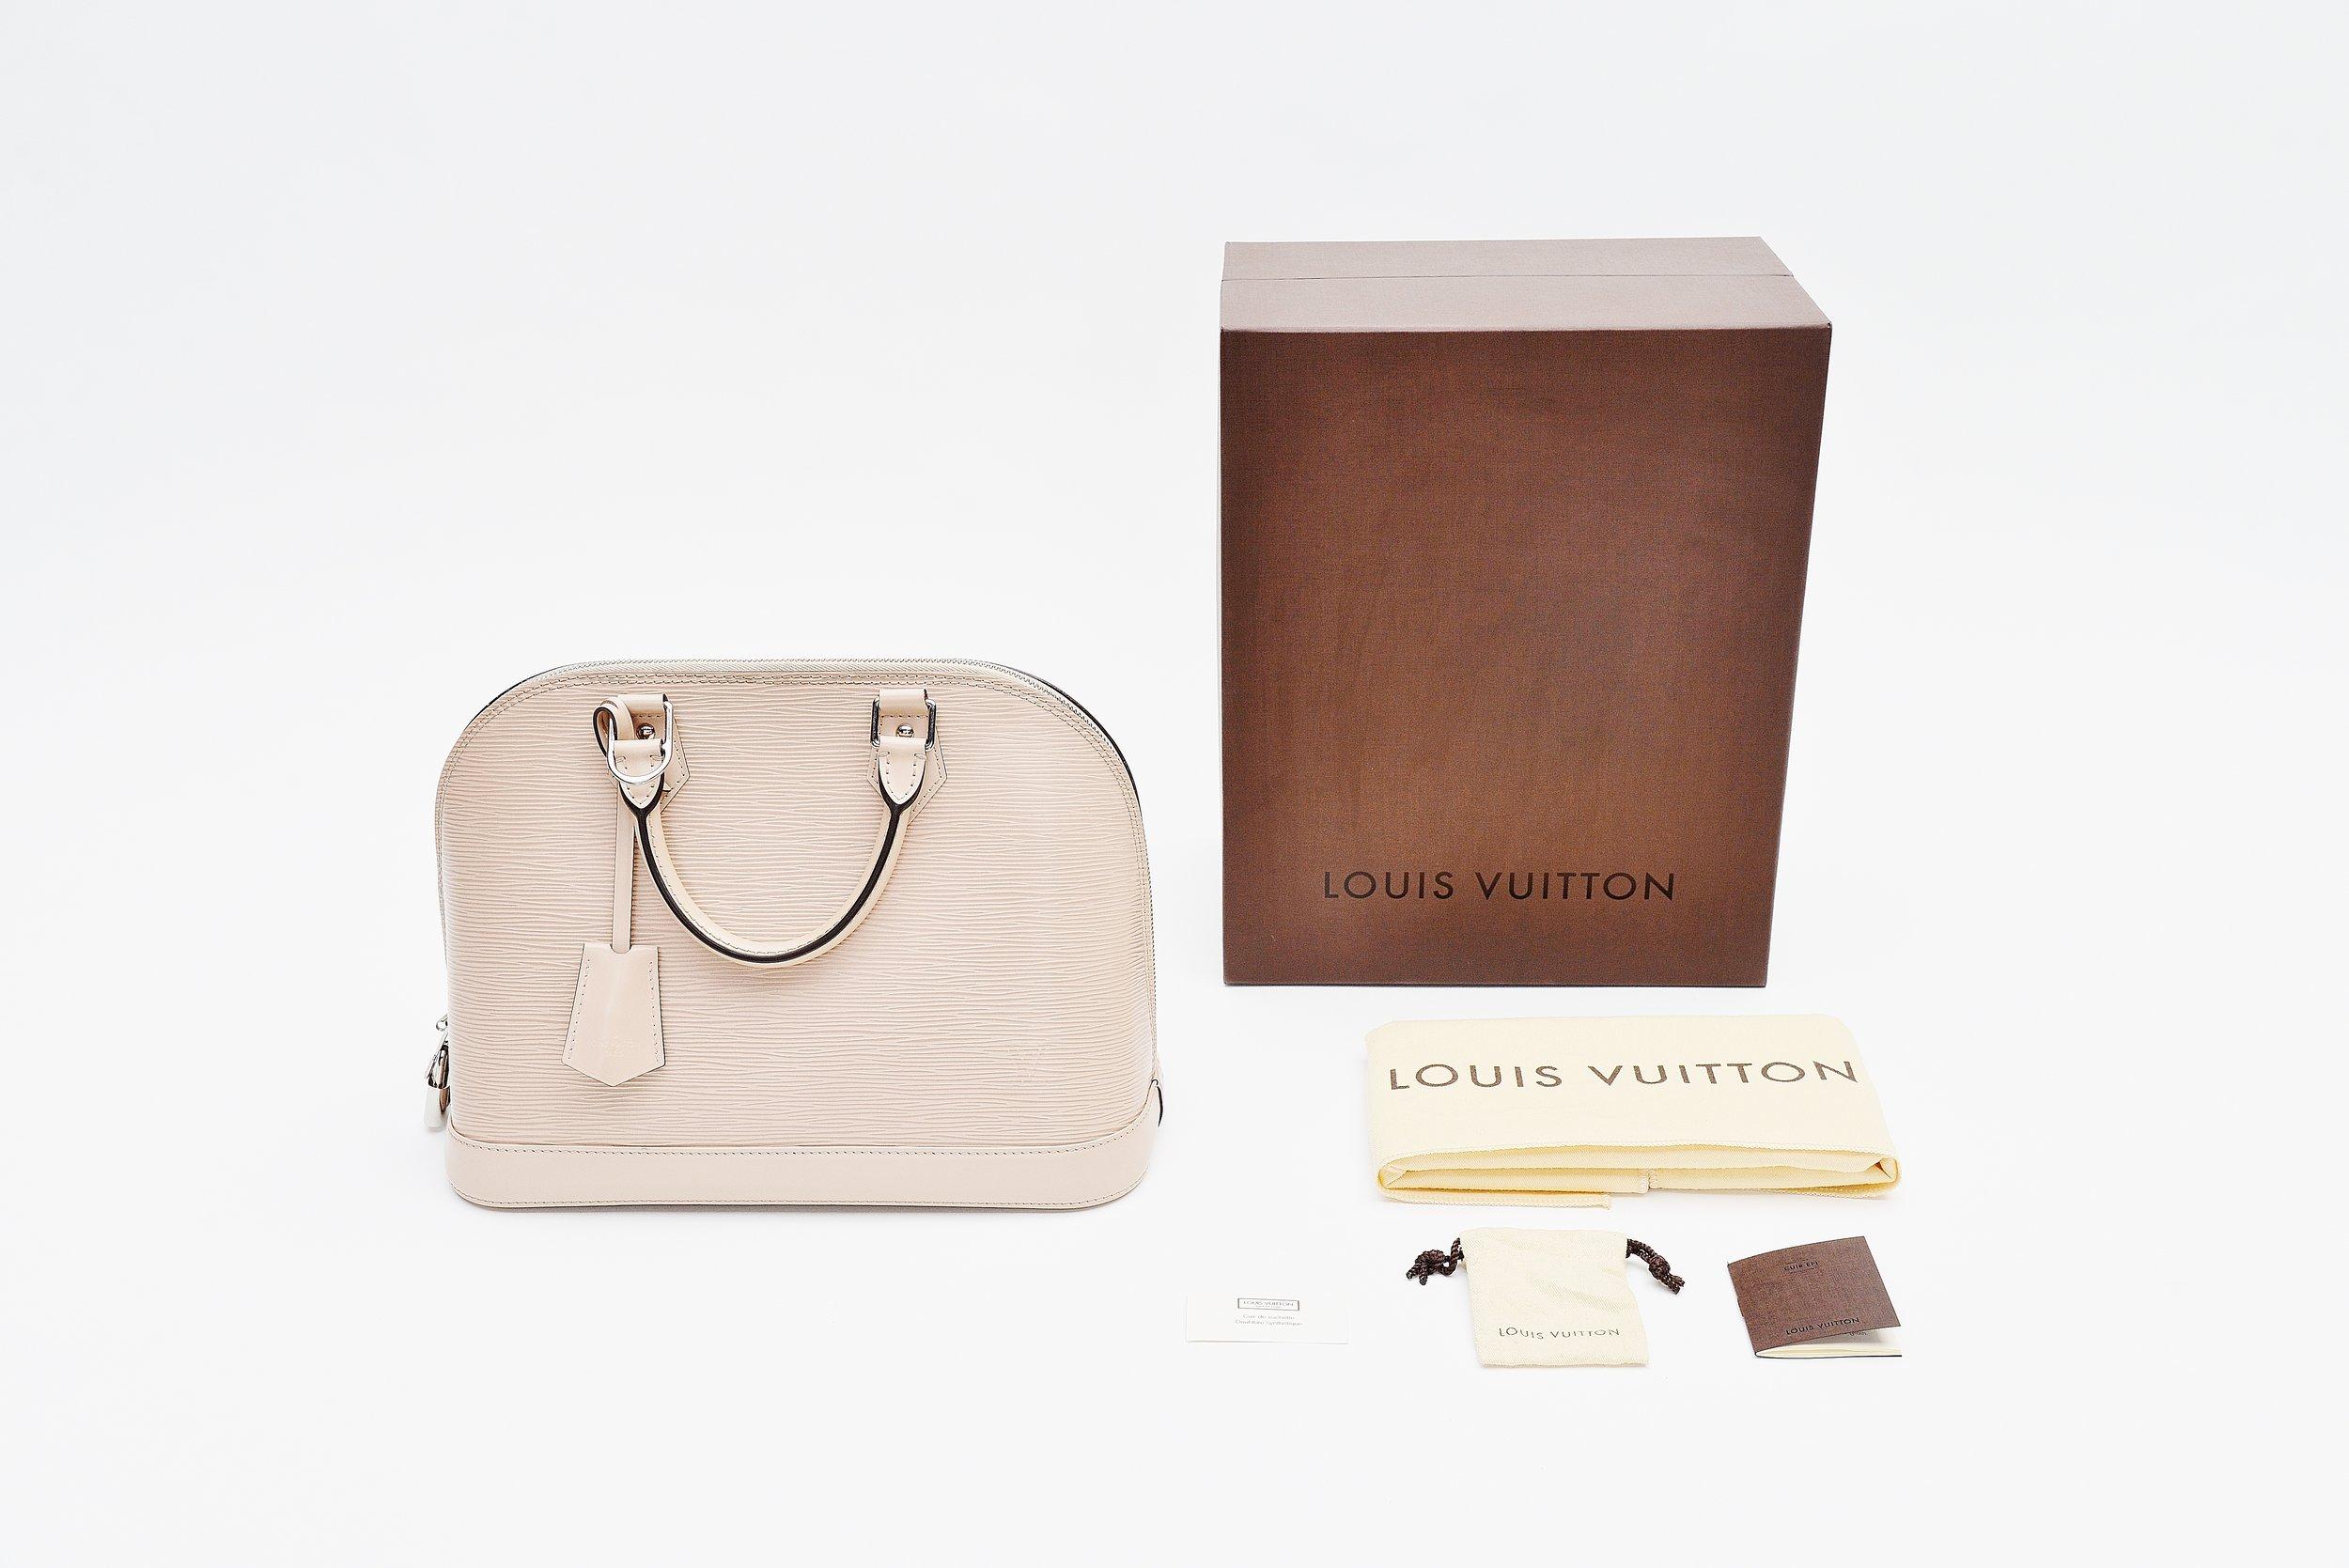 From the collection of Savineti we offer this Louis Vuitton Alma bag:
-	Brand: Louis Vuitton
-	Model: Alma
-	Year: 2014
-	Code: FL3194
-	Condition: very good
-	Materials: epi leather, silver-toned hardware 
-	Extras: Full-Set (box, dustbag, keys